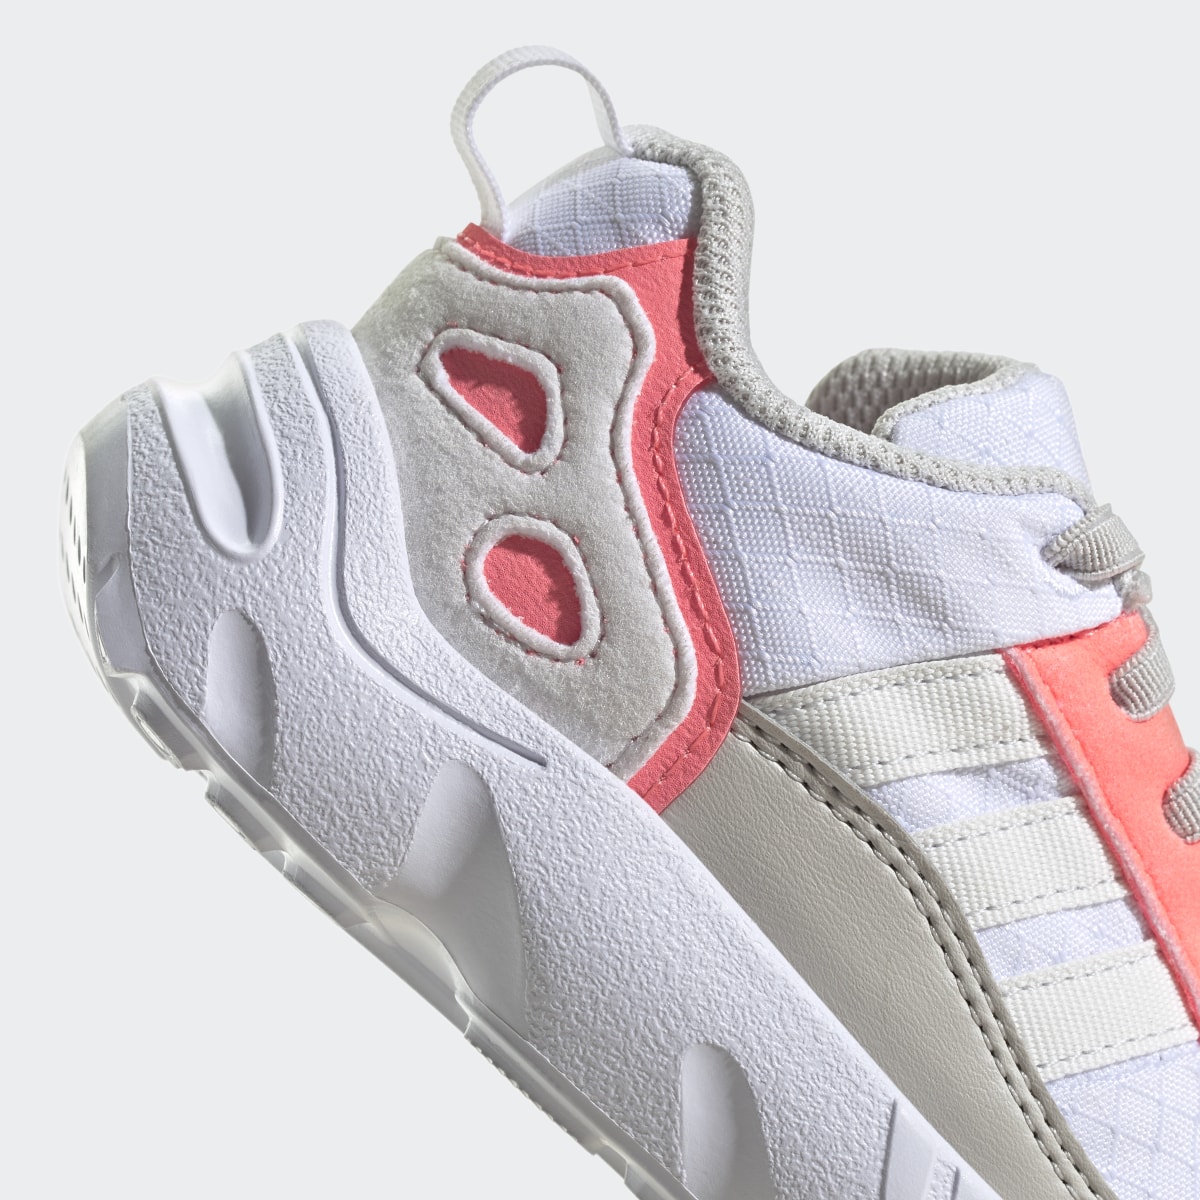 Adidas ZX 22 Shoes. 9